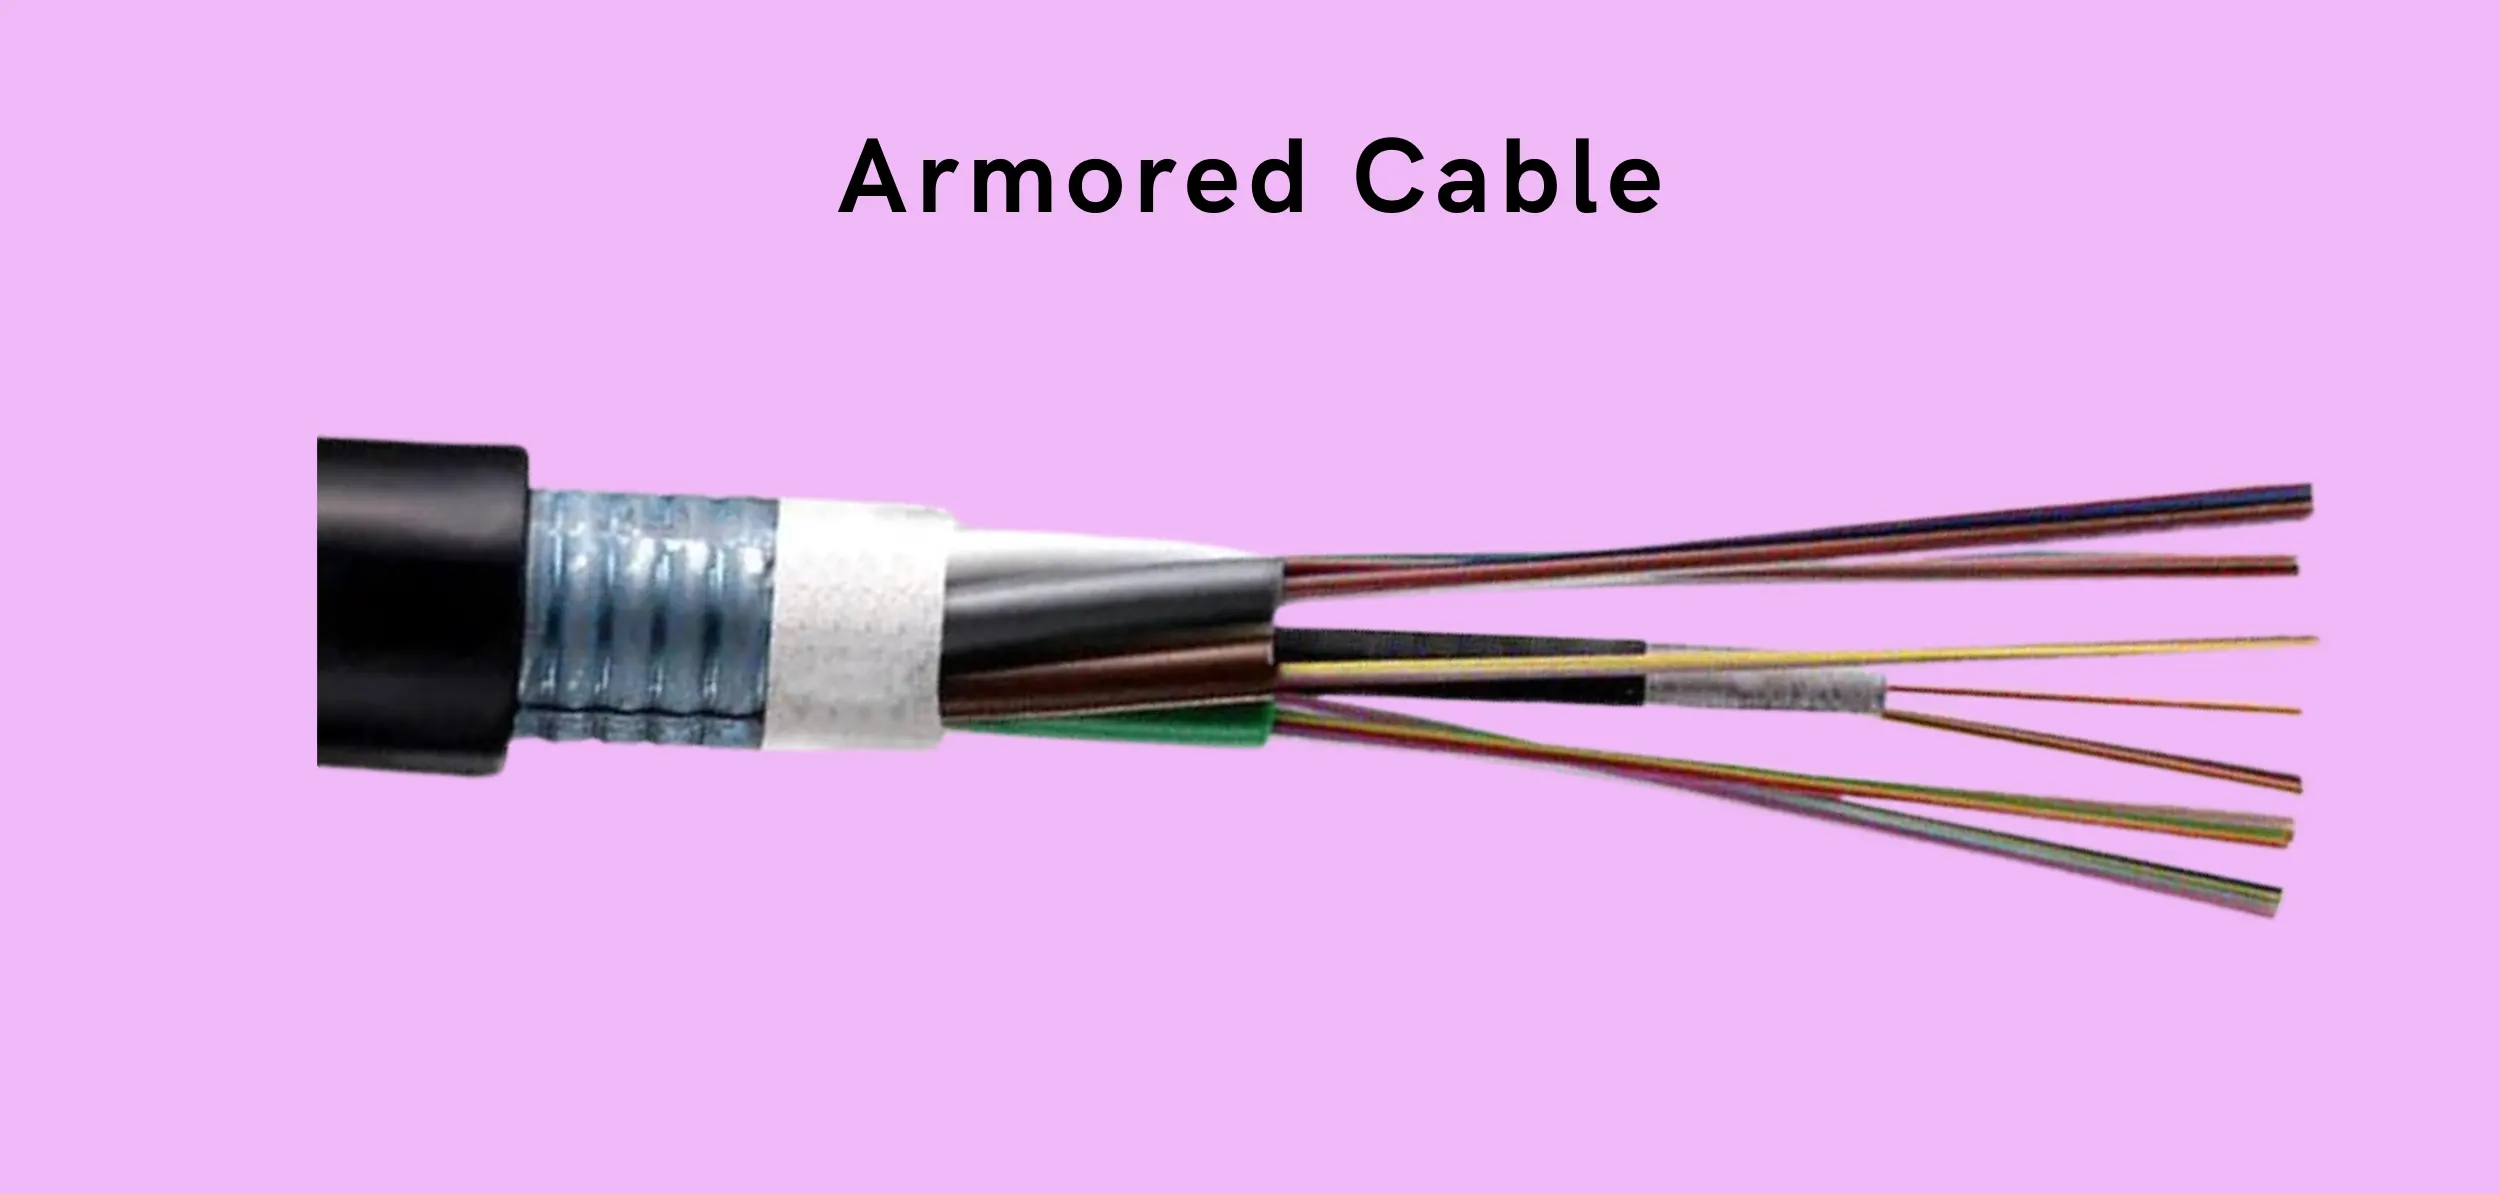 Fiber optic armored cable